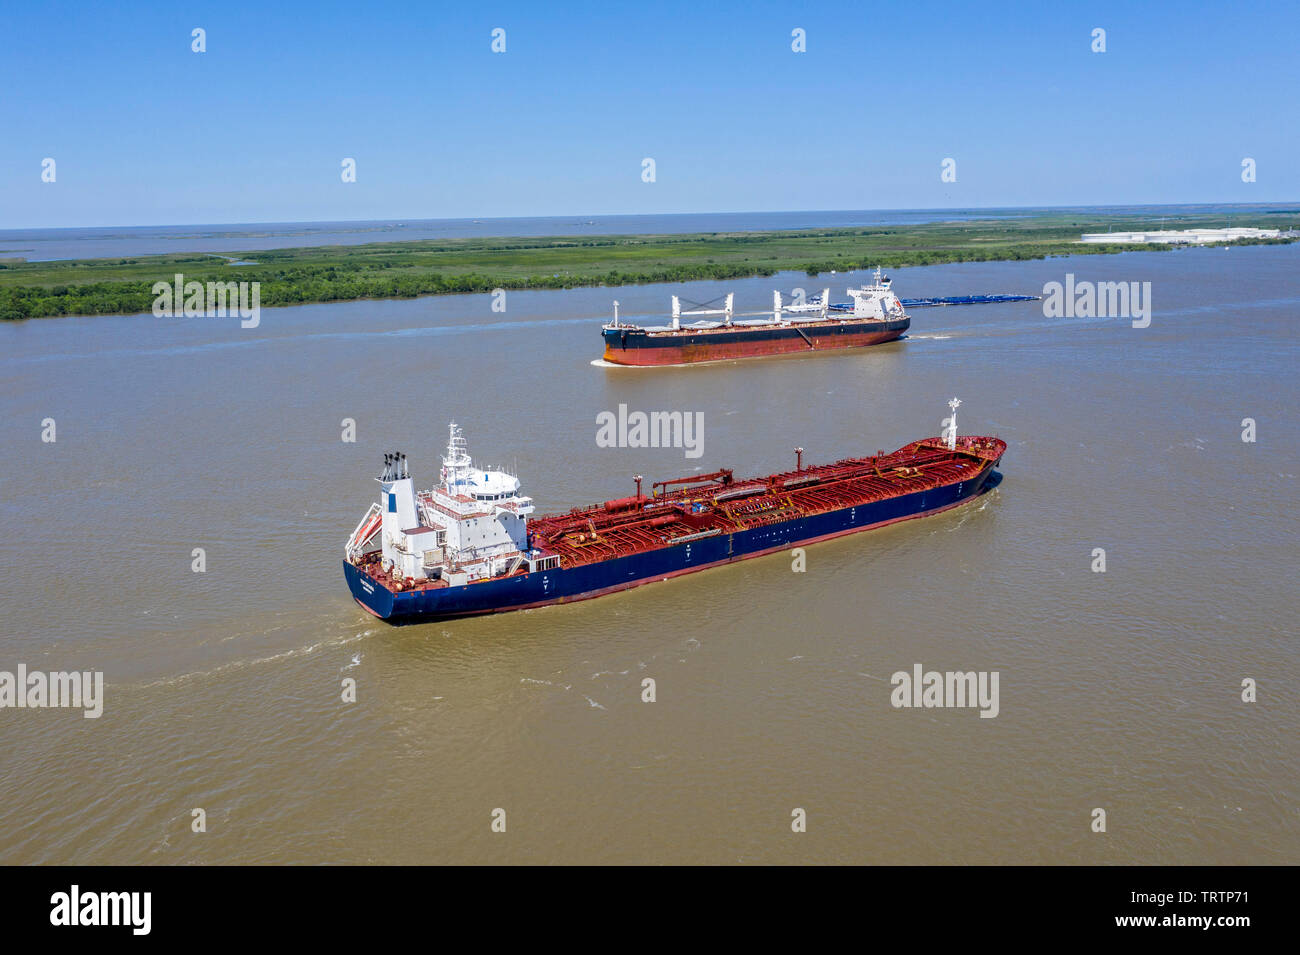 Empire, Louisiana - Ships on the Mississippi River below New Orleans. The Liberian oil/chemical tanker Tintomara (foreground) sails towards the Gulf o Stock Photo